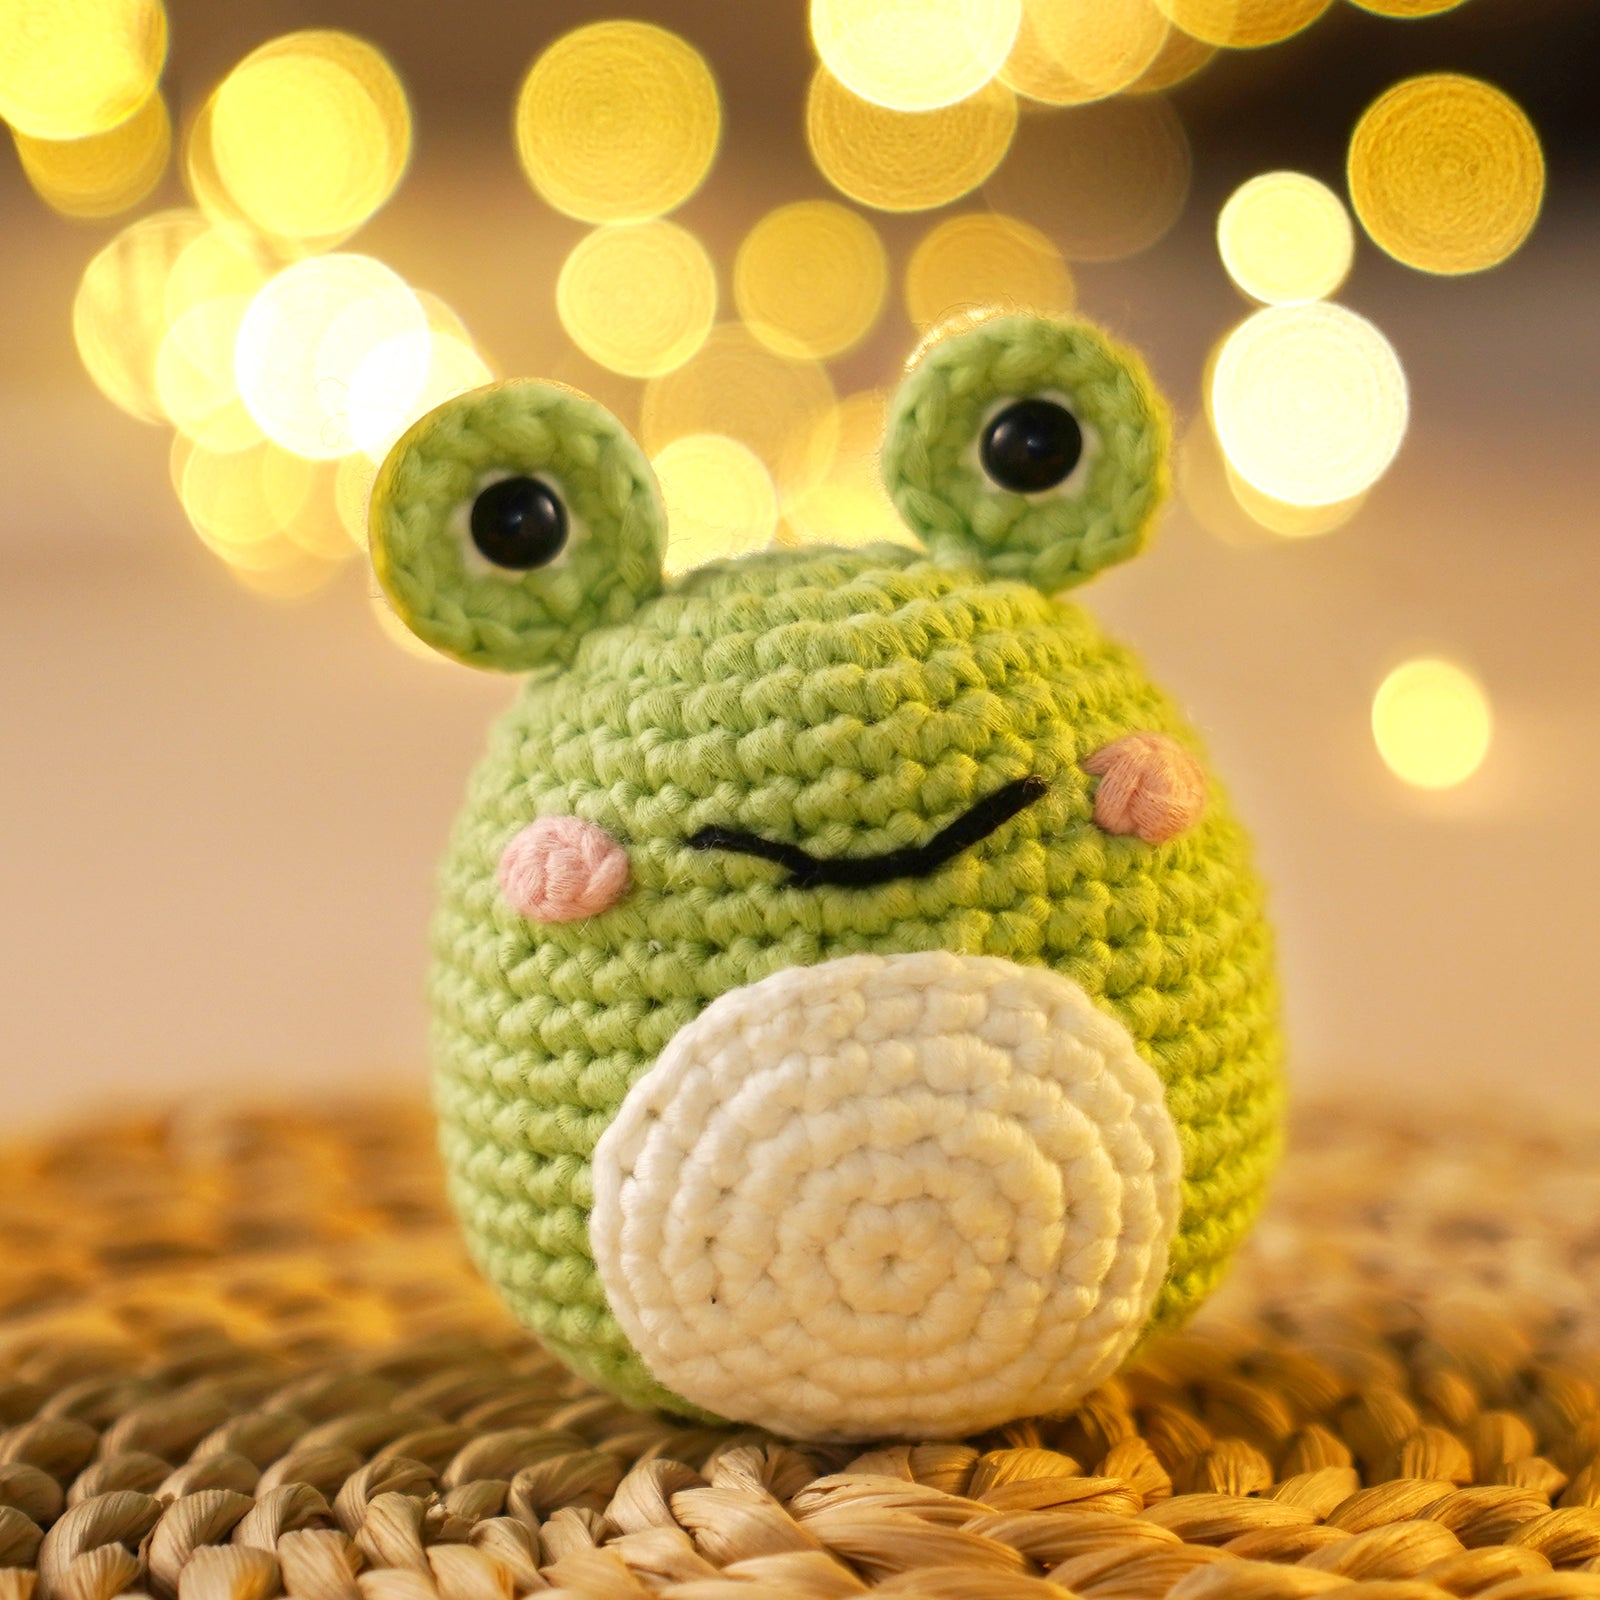 CrochetBox Crochet Kit for Beginners: Frog Crochet Kit for Adults, Teens, Starters, Include Easy to Use Yarn, Step-by-Step Video, Patterns, Cute Animal Design, Thanksgiving, Christmas, Birthday Gift